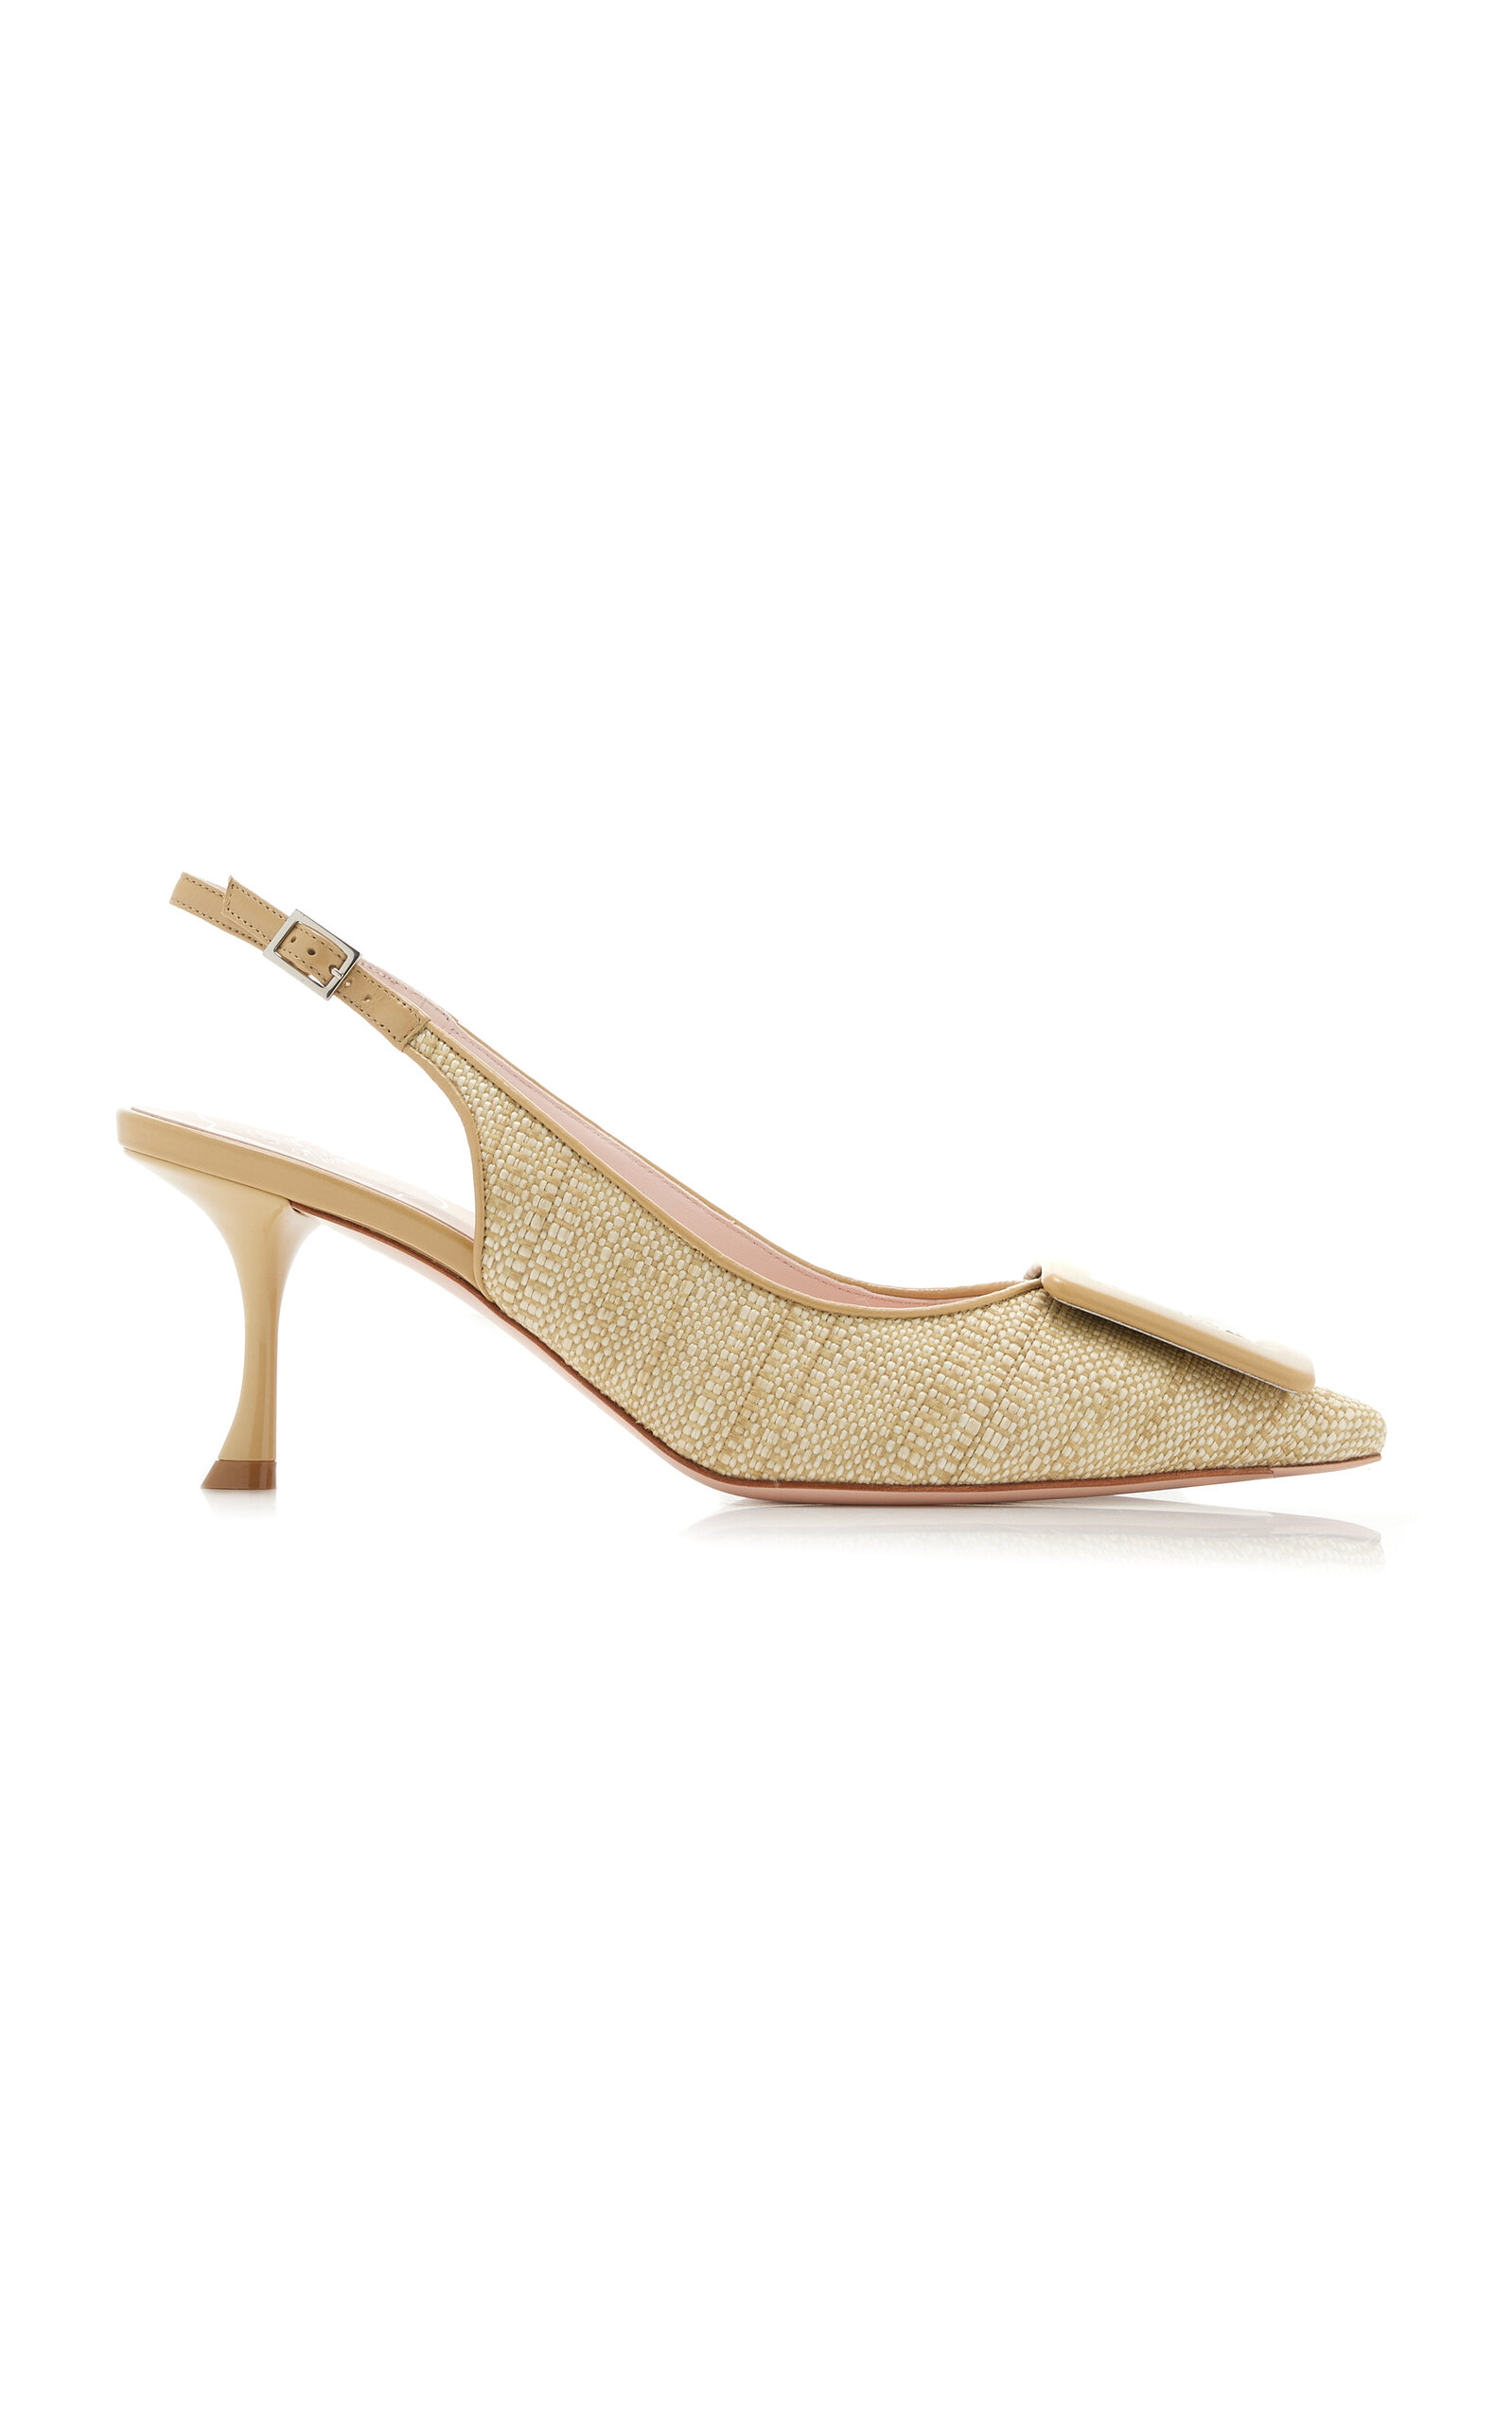 Viv In The City Woven Slingback Pumps